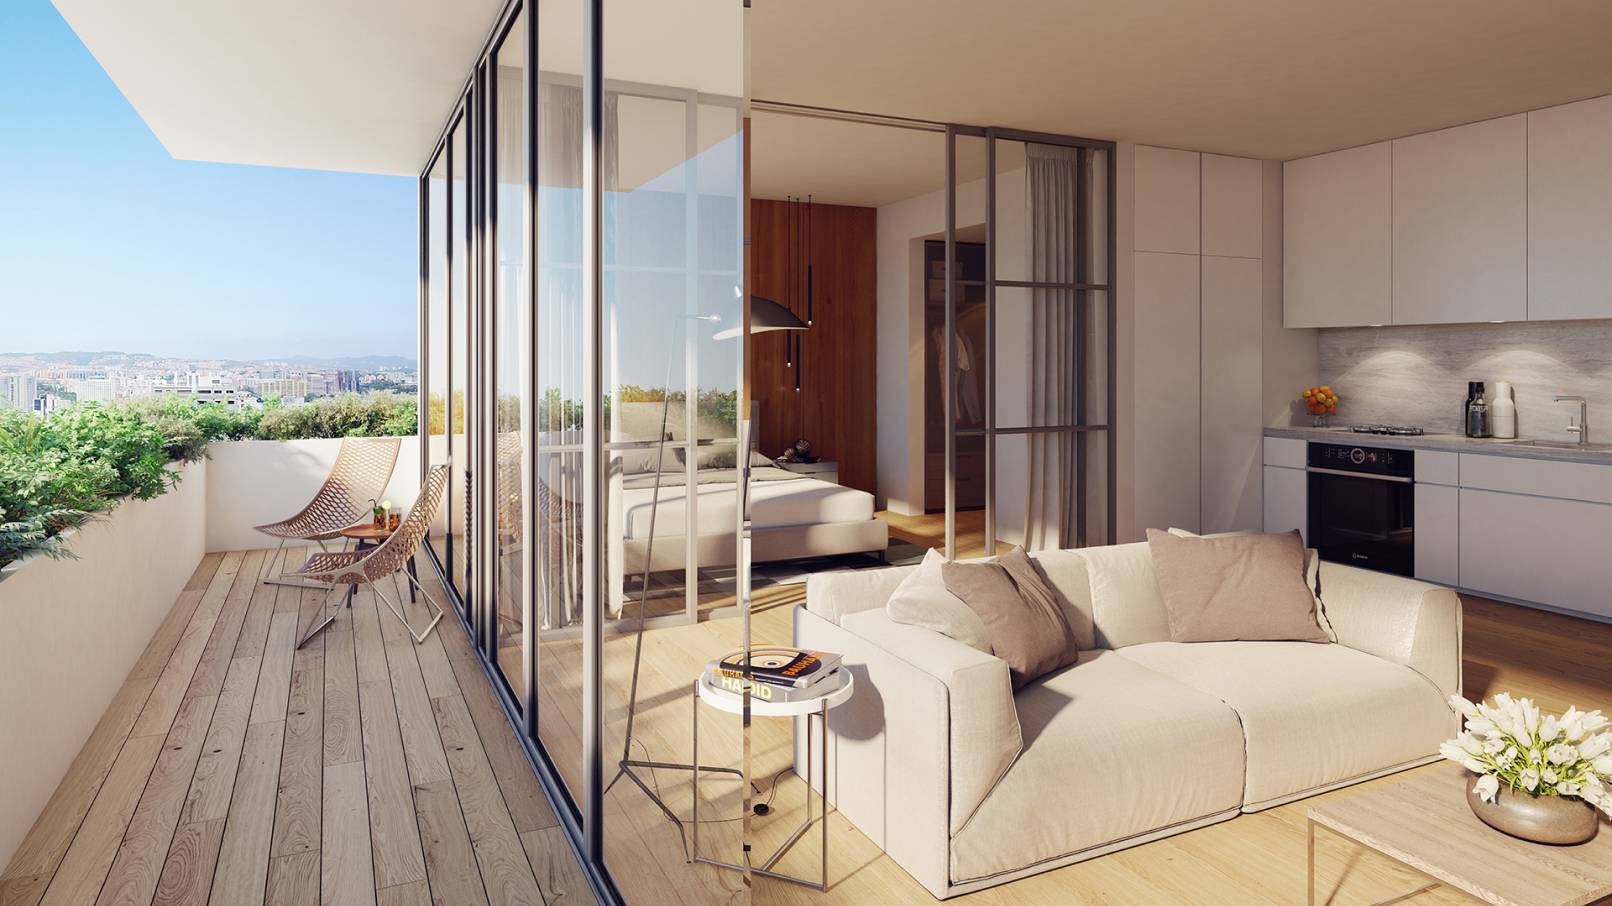 T2 + Terrace Apartment. A precious opportunity on one of Lisbon’s highest hills.